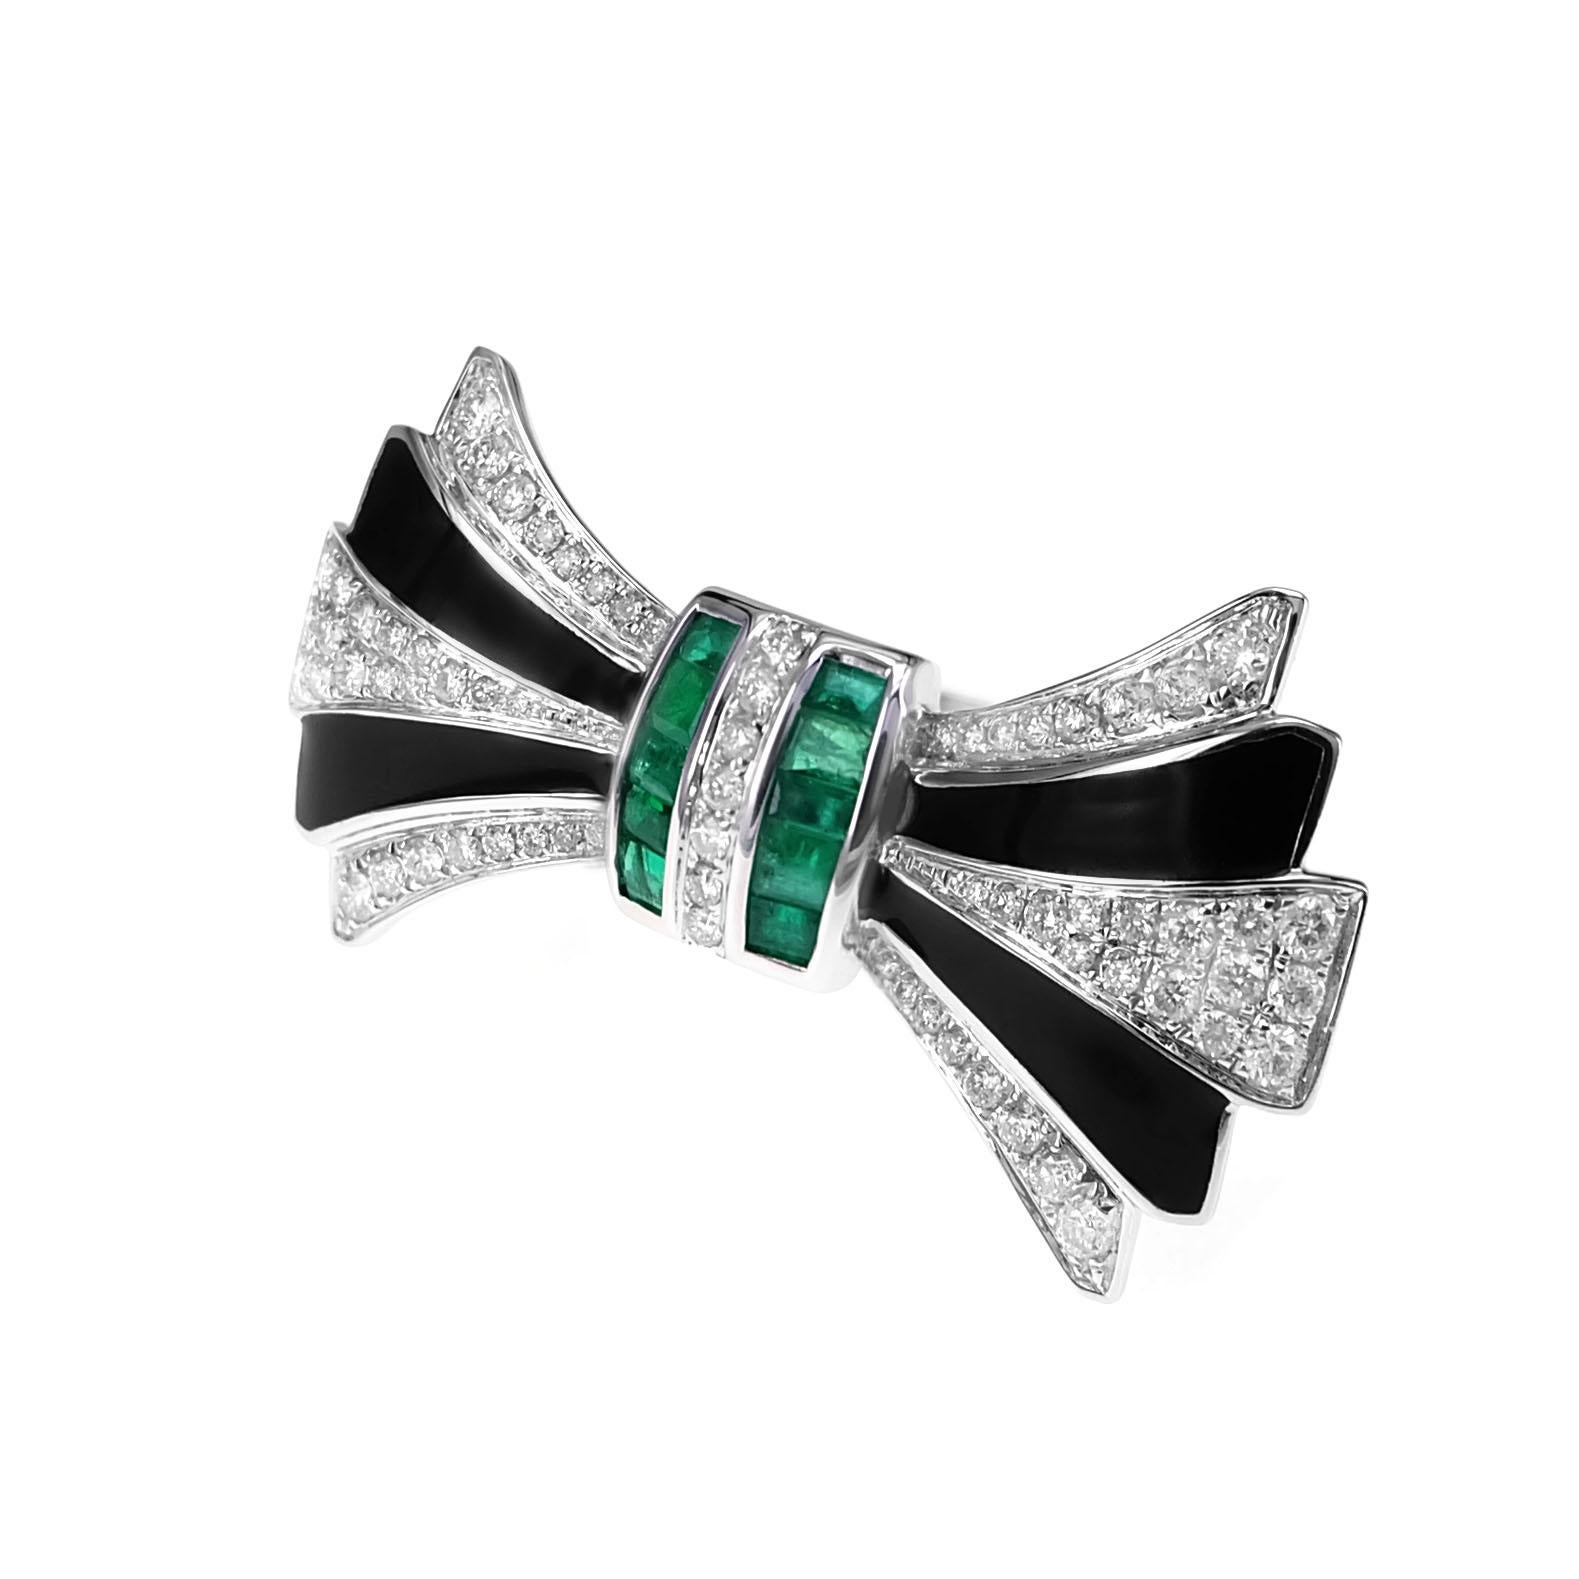 A cute ring for all ages inspired by a Bow using 0.72 carats of vivid green emerald and 0.71 carats of white round brilliant diamond. The ring also has 0.55 carats of Onyx. The details of the ring is mentioned below:
Color: F
Clarity: Vs
Ring Size: